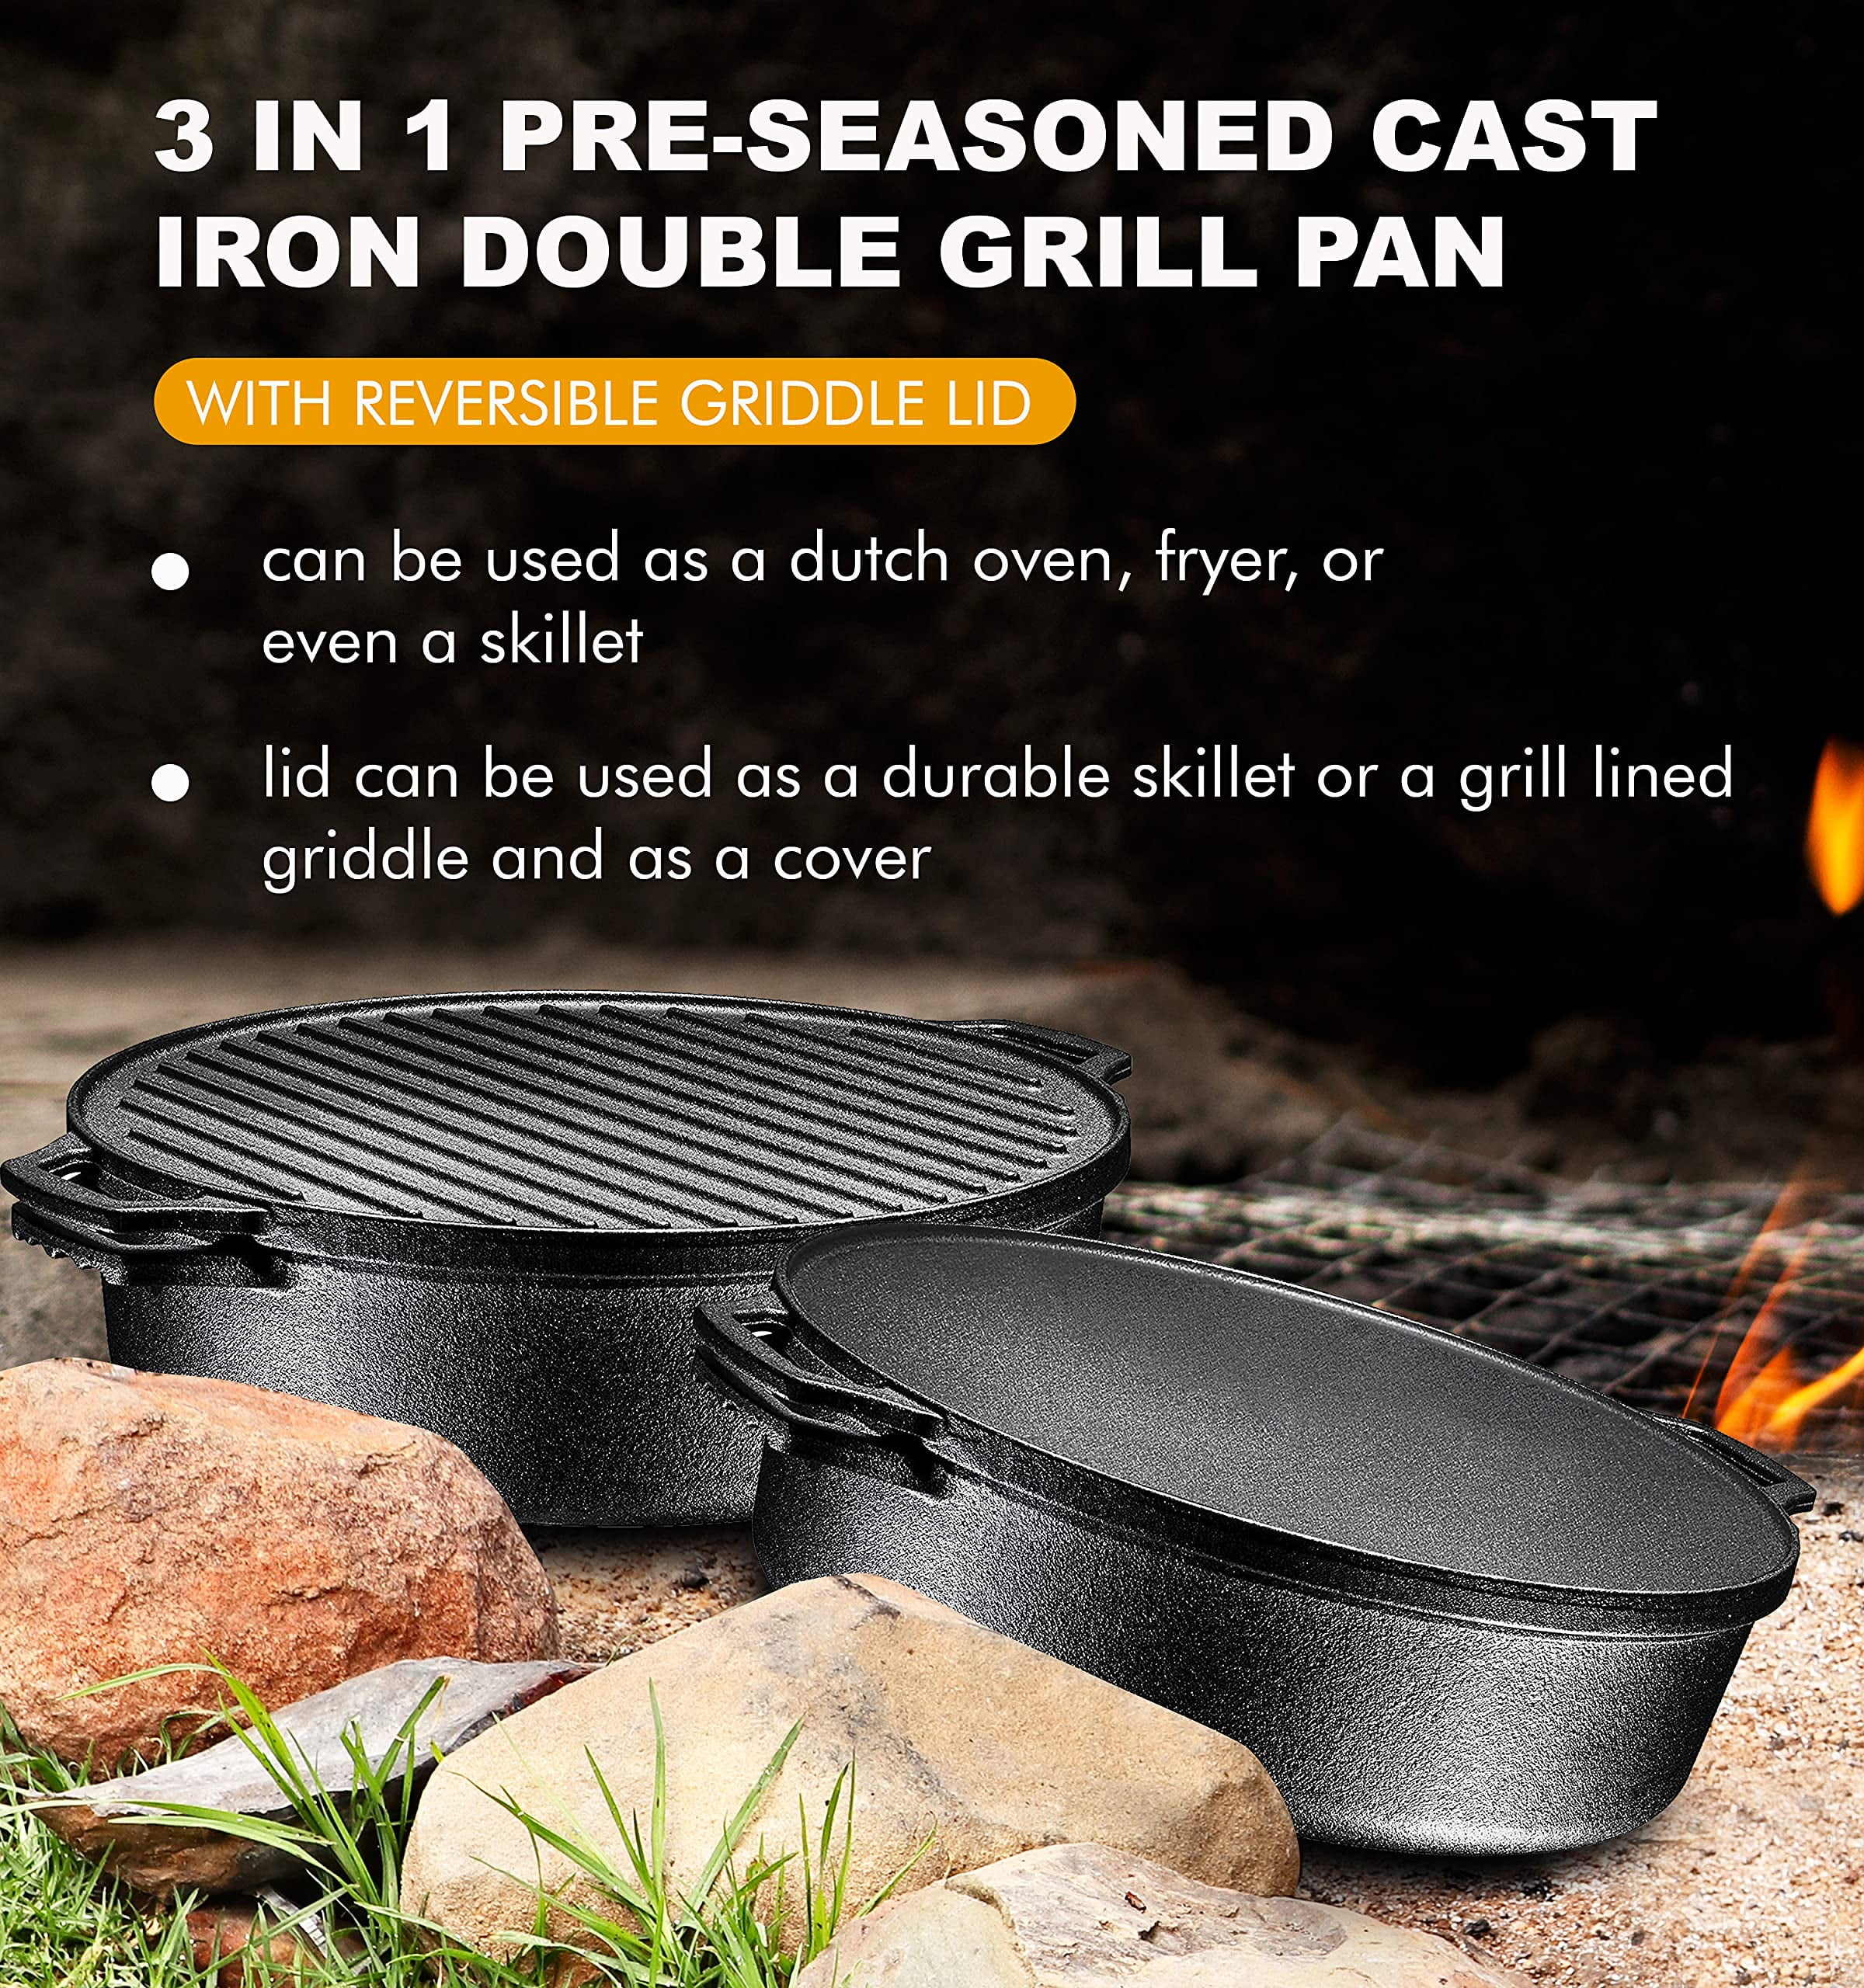 Versatile Cast Iron Grill And Roasting Pan For Indoor And Outdoor